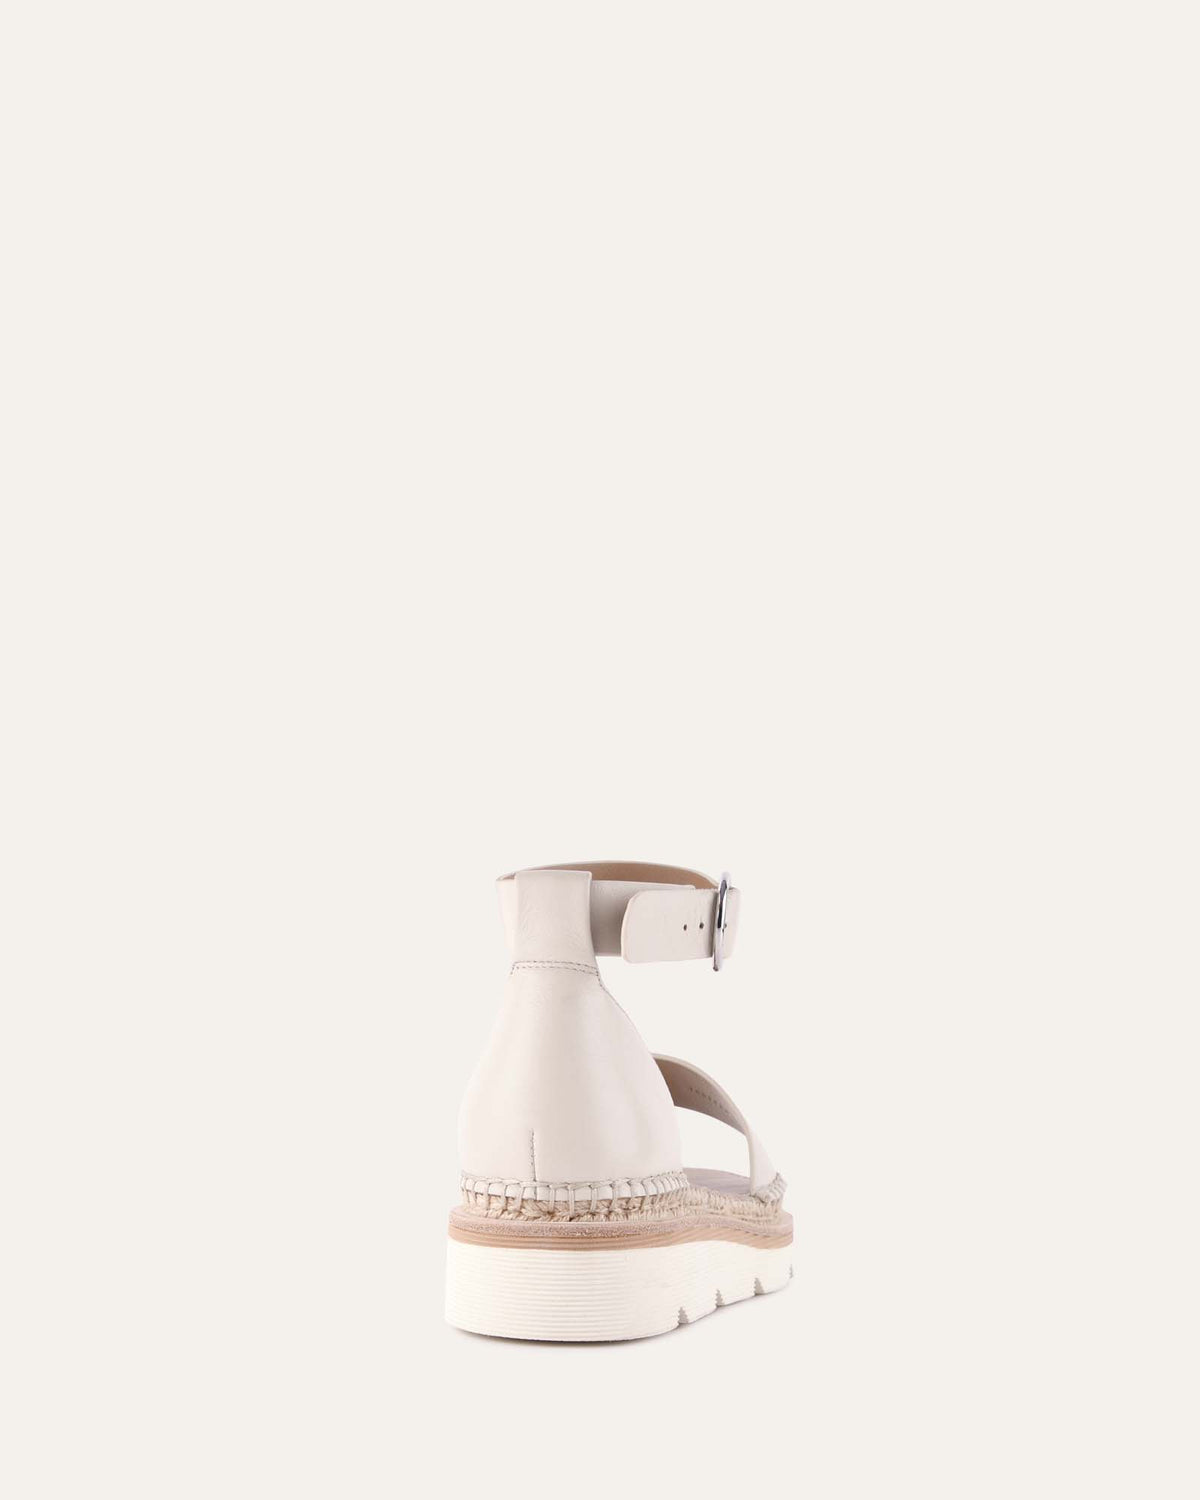 IVY FLAT SANDALS OFF WHITE LEATHER